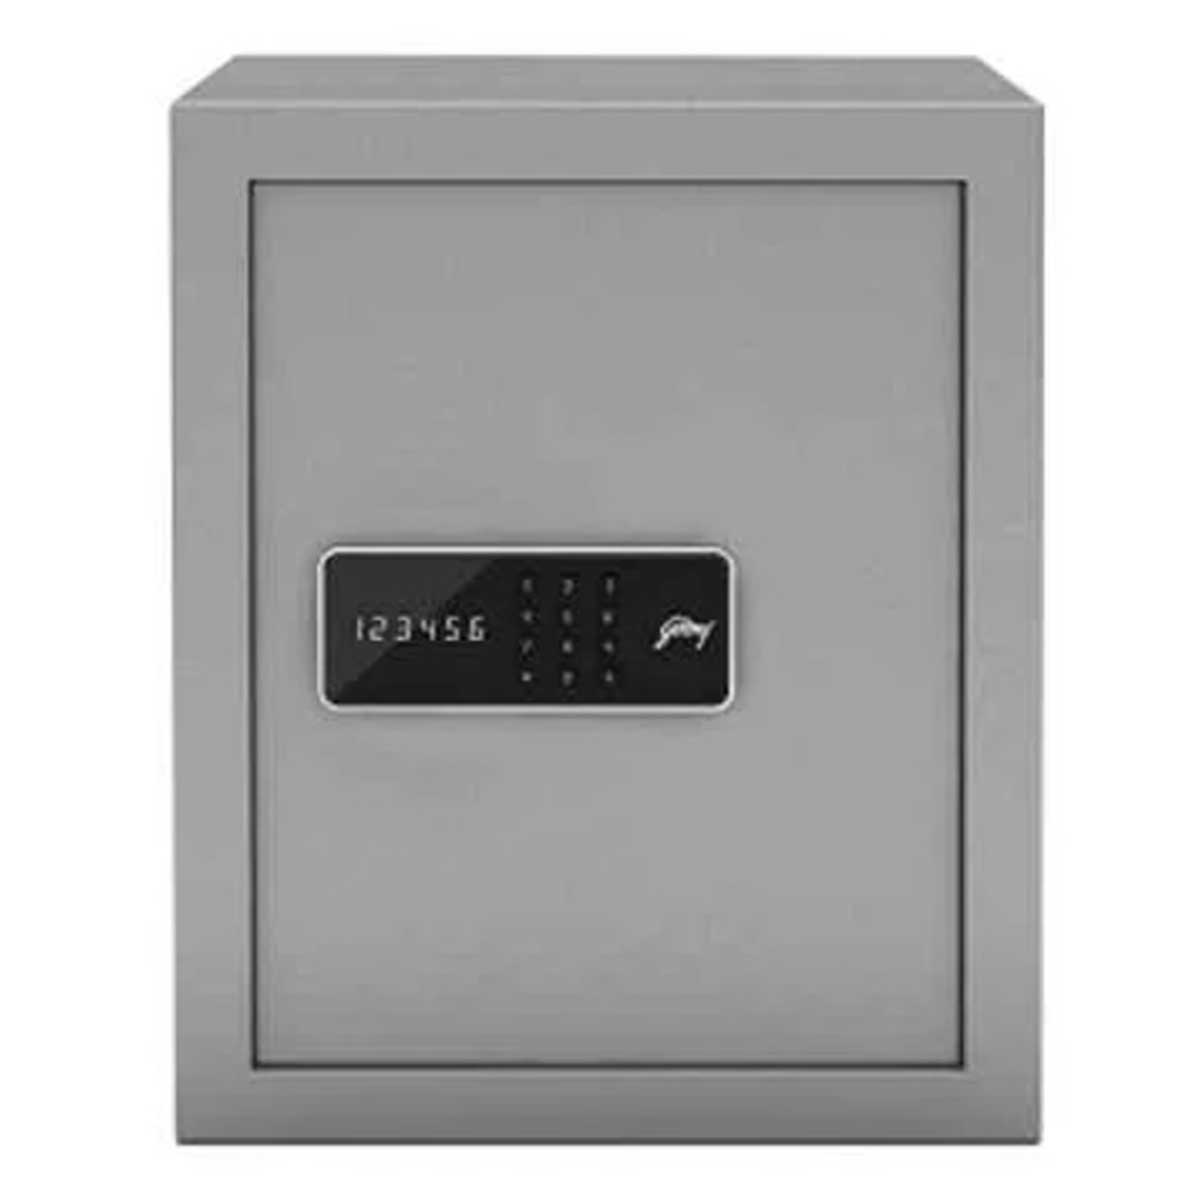 Steel security safe Manufacturers, Suppliers in Mohan Cooperative Industrial Estate